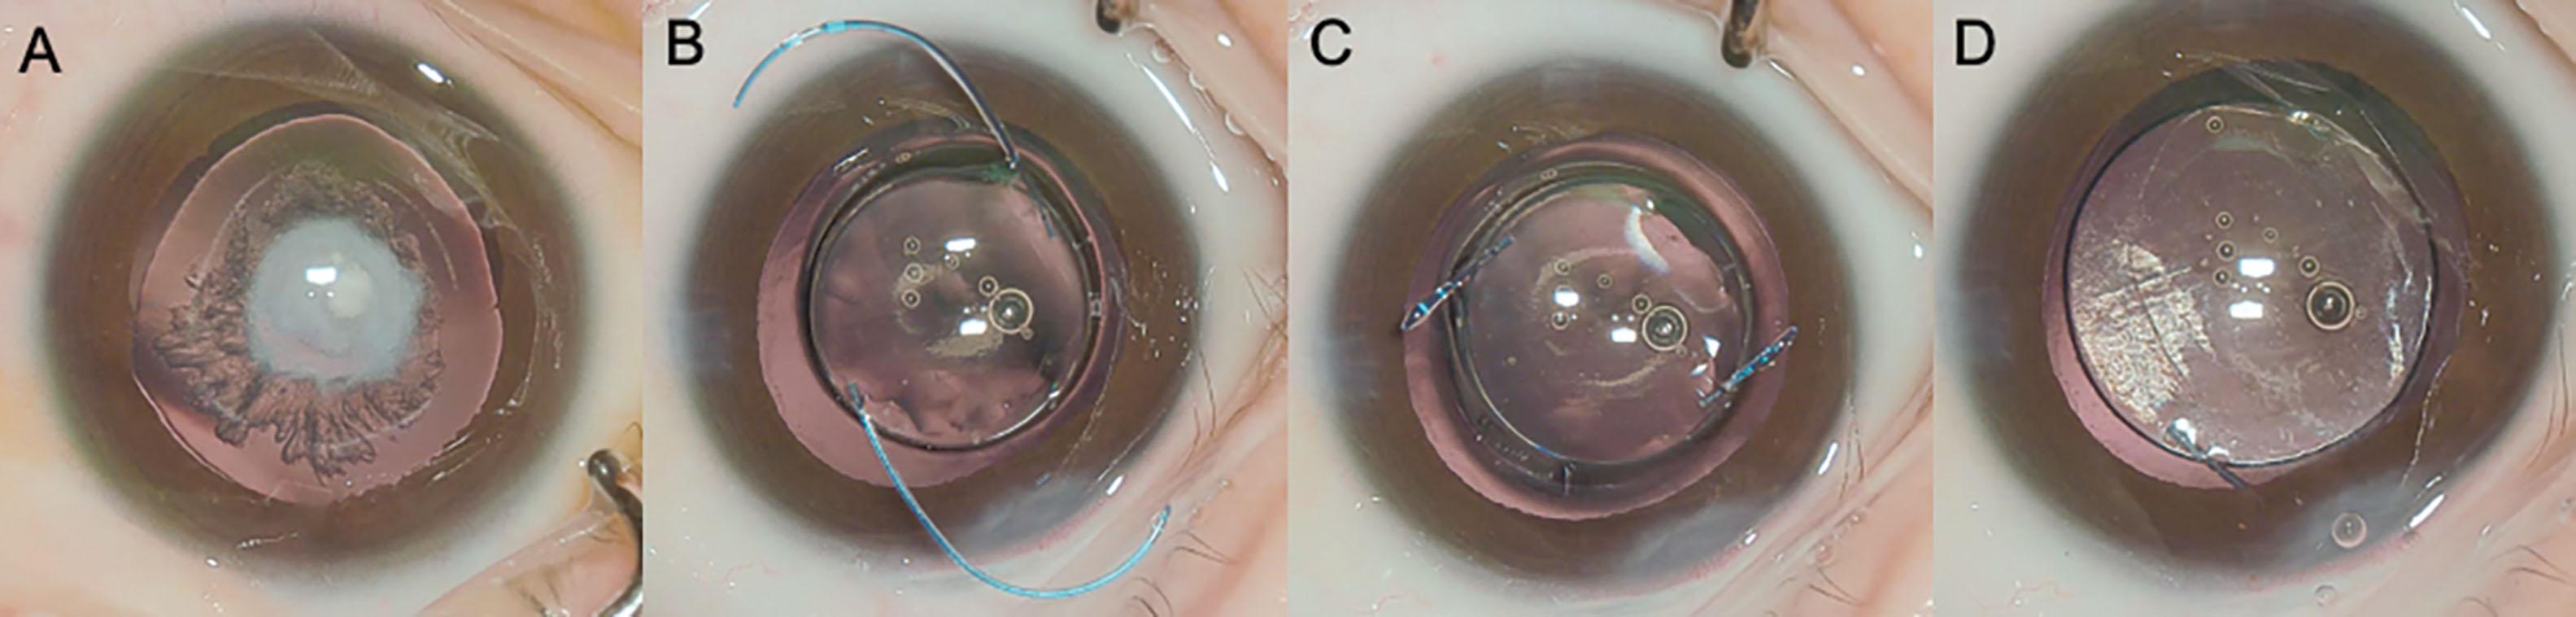 Fig. 40.1, (A) Surgical microscope view at the beginning of surgery in a patient with congenital cataract and microspherophakia. The reduced equatorial diameter is evident. (B) Immediately before IOL implantation, it is clear that this 3-piece IOL with 5.5 mm of optic diameter and 12.5 mm of haptic-to-haptic diameter will not fit with its original configuration in this small capsular bag. (C) Both haptics of the 3-piece IOL are partially amputated. (D) At the end of the procedure, the IOL is in the bag and stable, with both partially amputated haptics anchoring it to the bag, avoiding its anterior or posterior dislocation, in spite of the anterior and posterior capsulorrhexis.